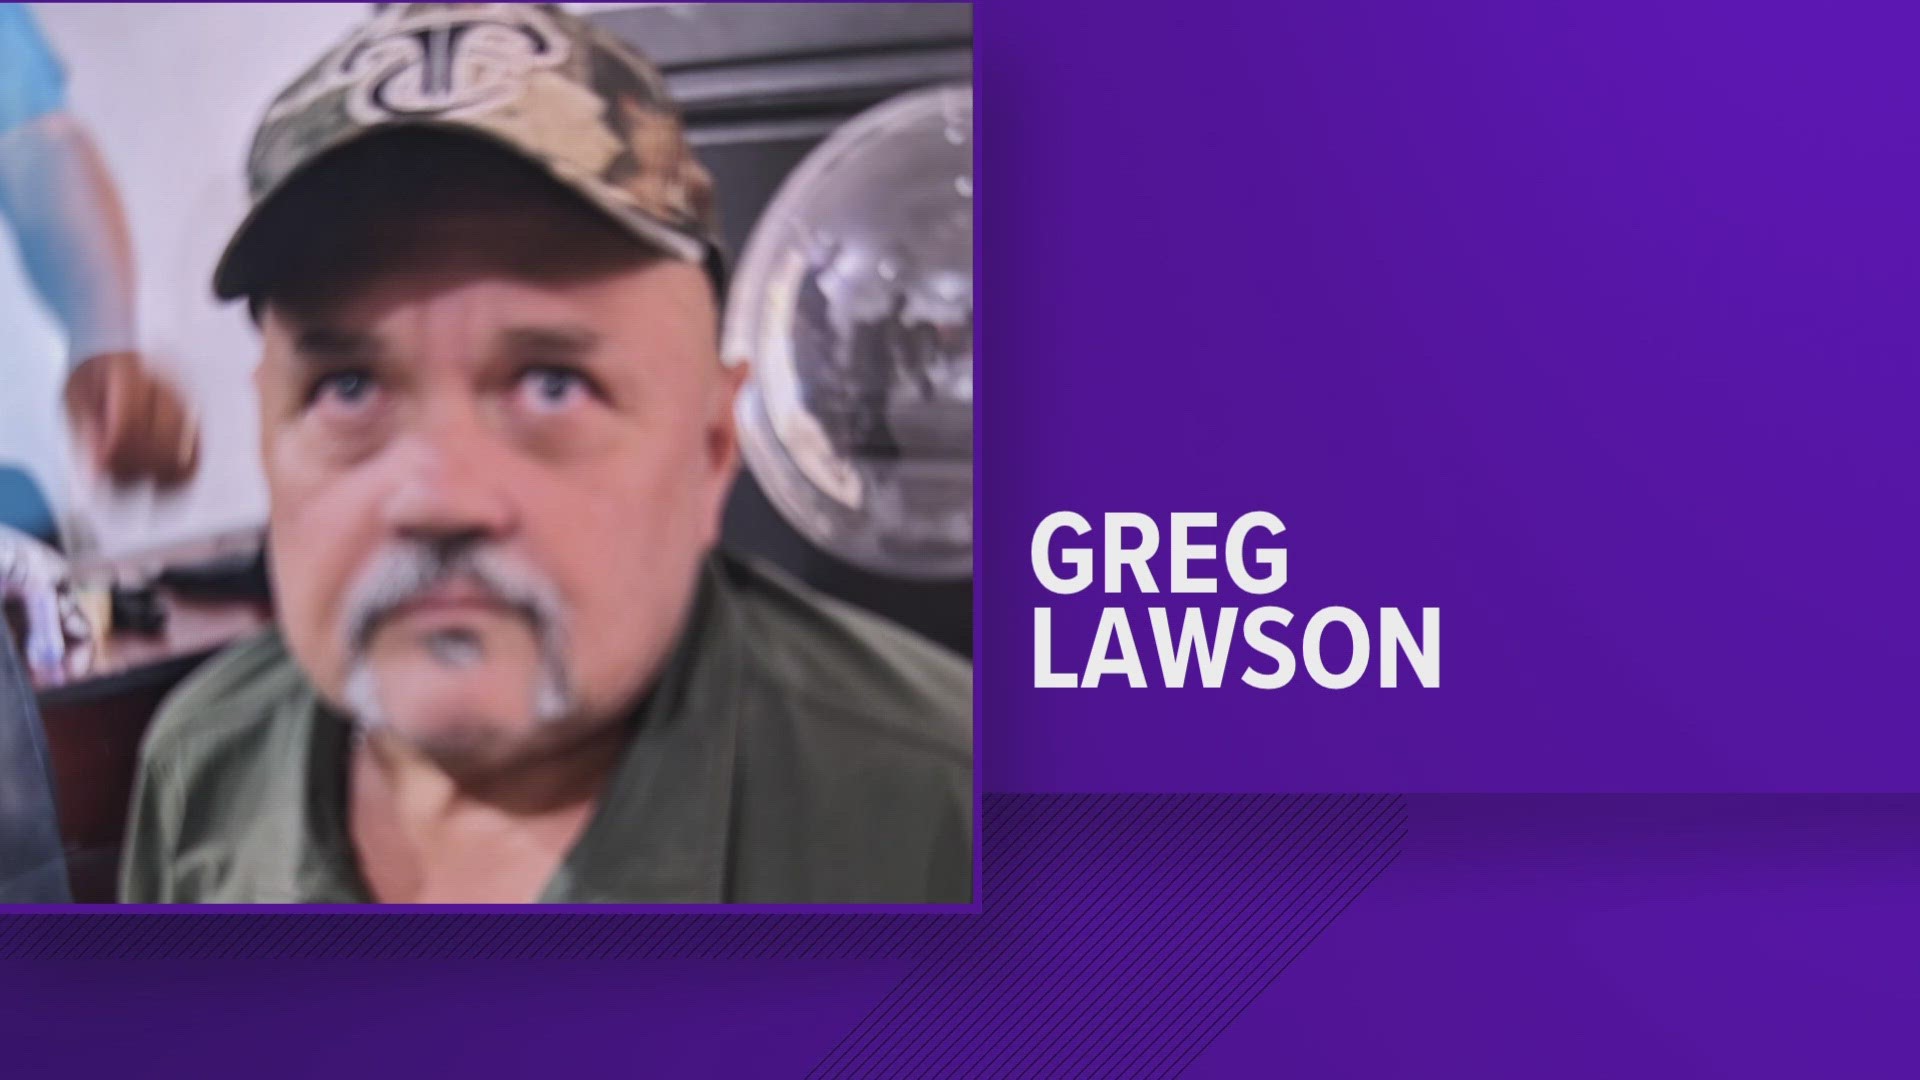 Greg Lawson, 63, was arrested on Tuesday after fleeing the country in 1991